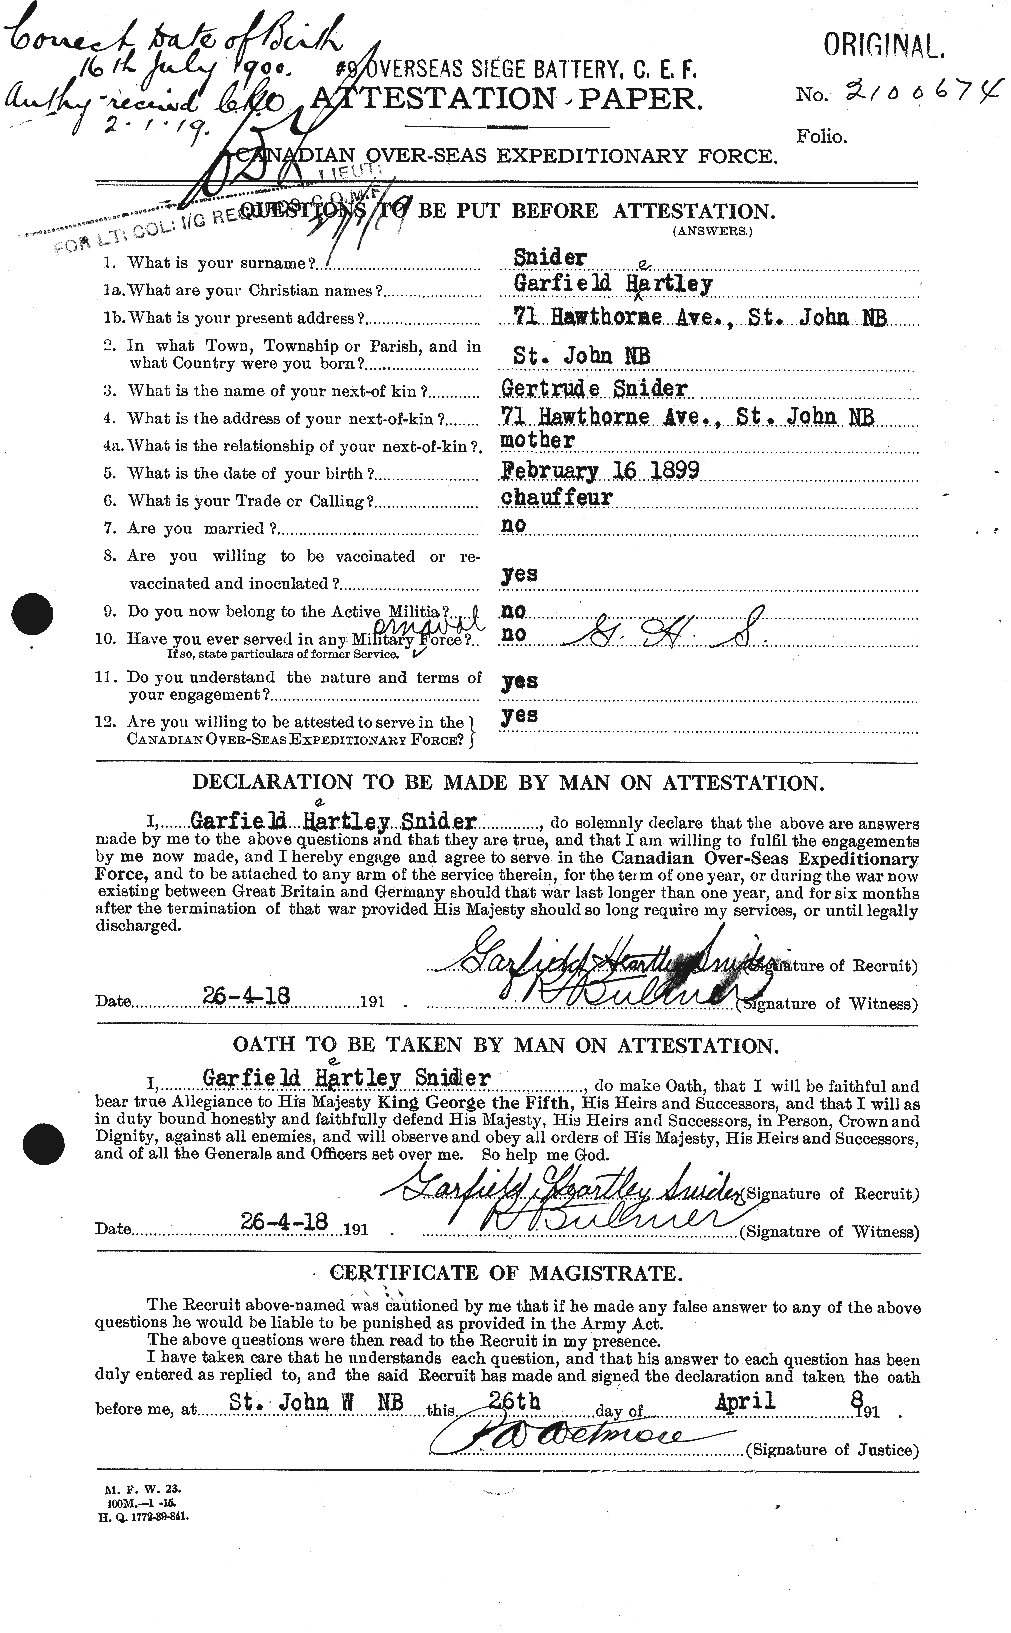 Personnel Records of the First World War - CEF 110039a